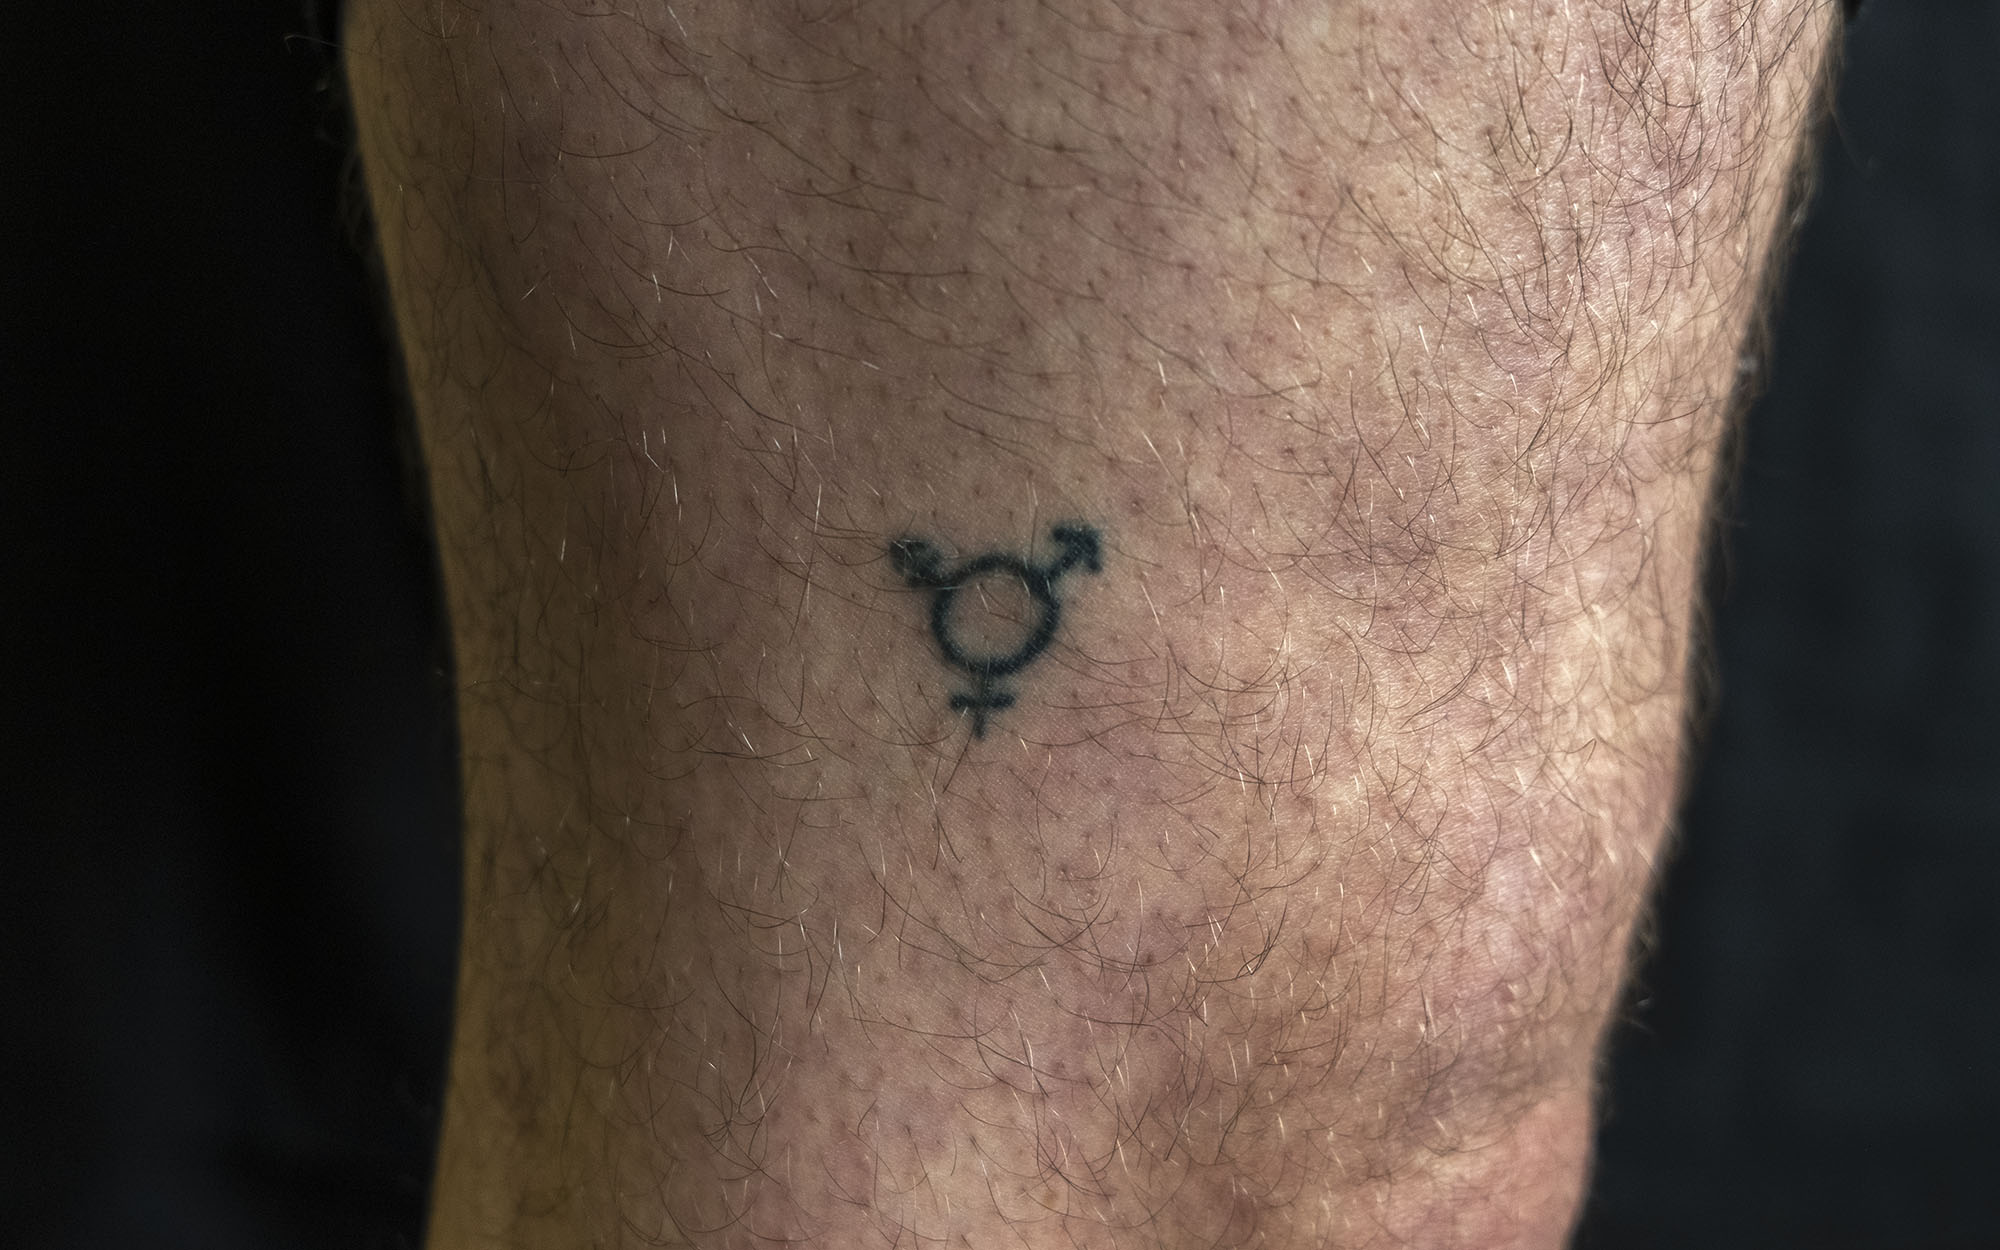 Close up of the side of a leg with a tattoo of a circle and three symbols coming out of it: the female symbol, the male symbol, and a combination of the two